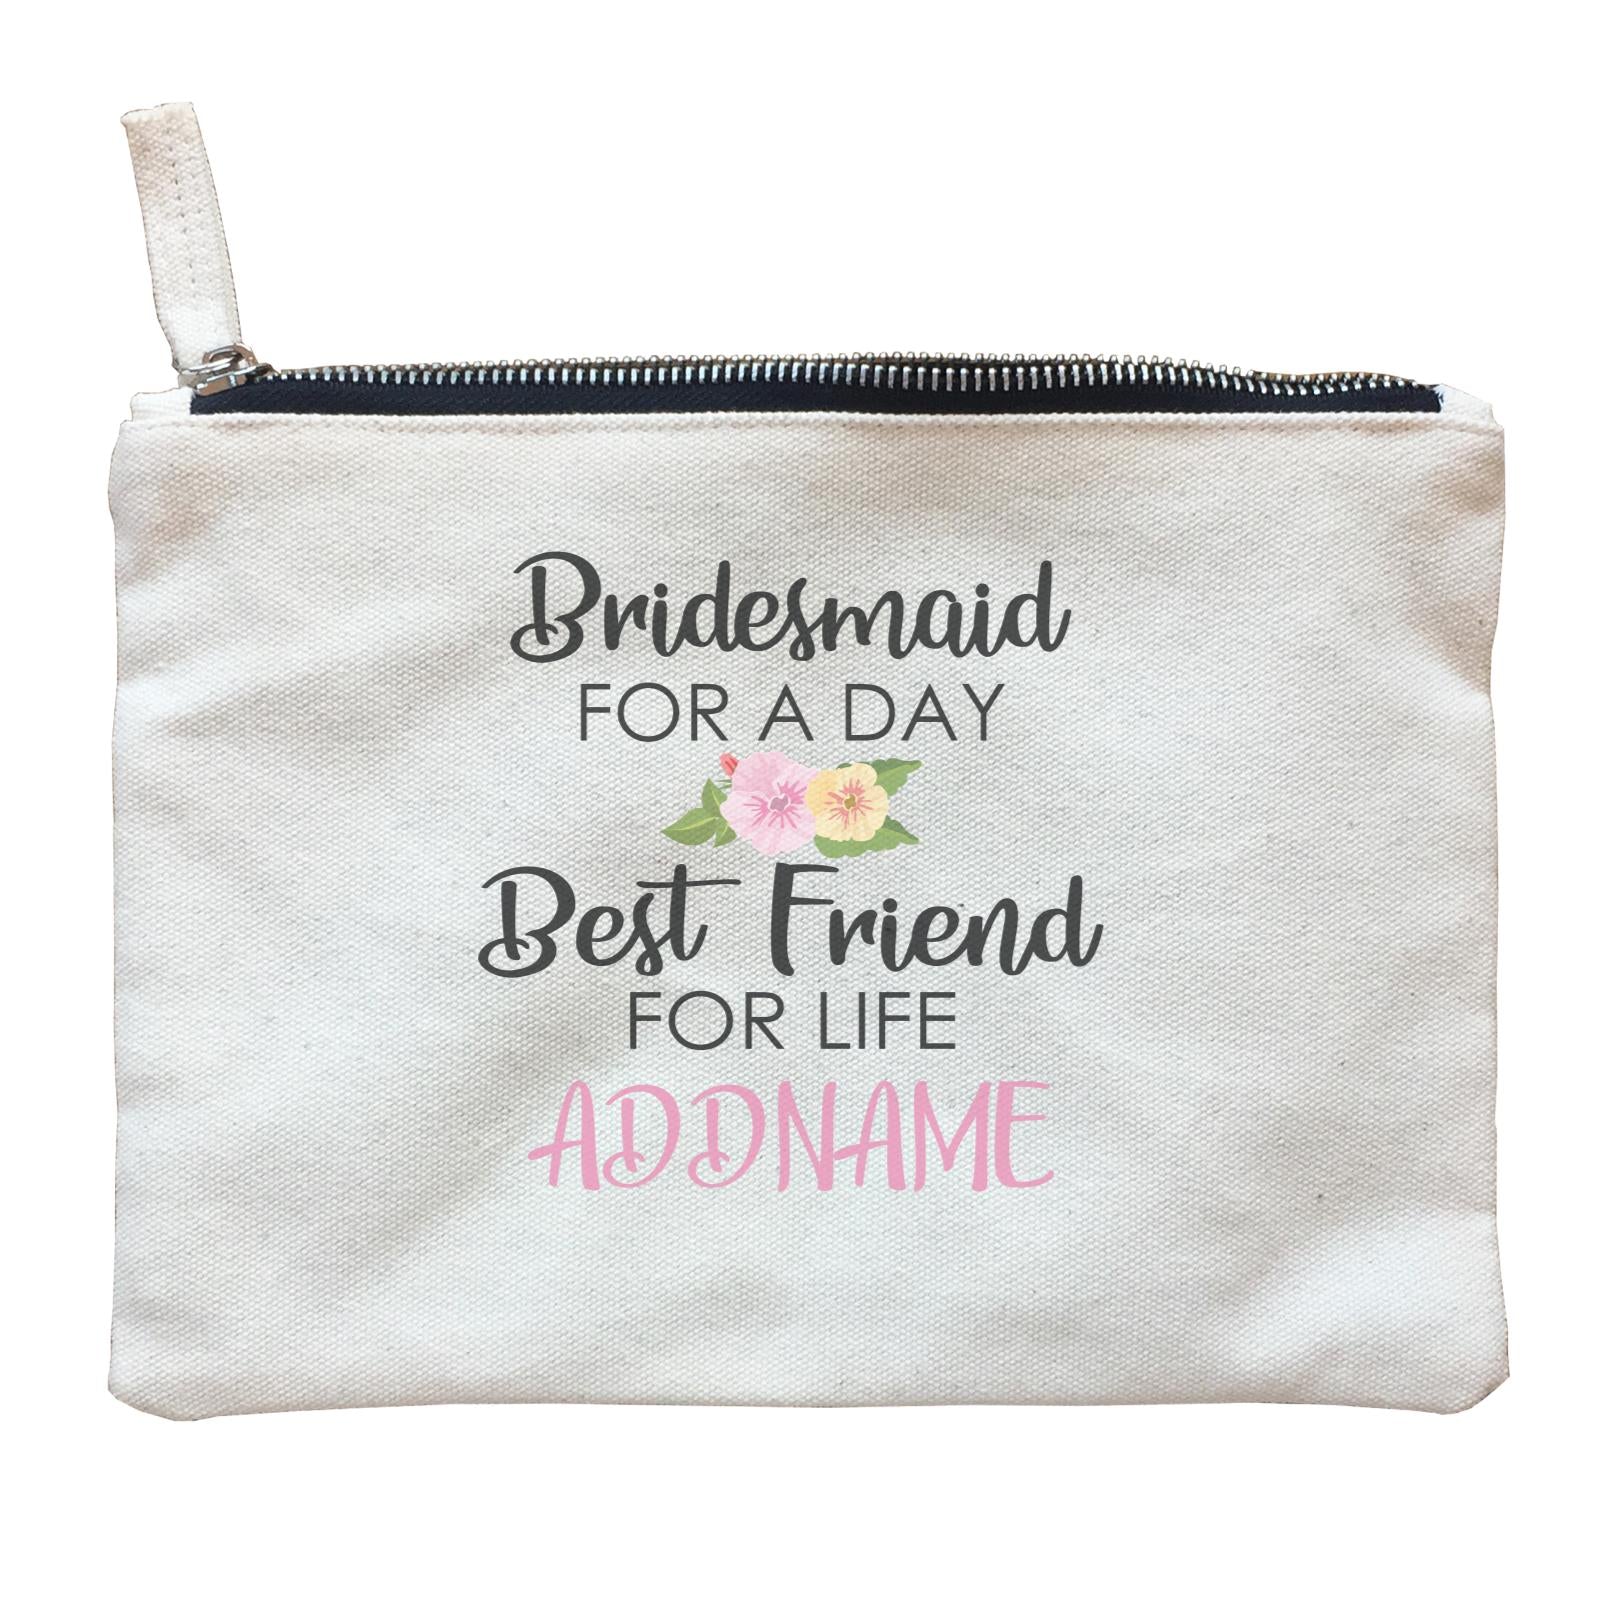 Random Quotes Bridesmaid For A Day Best Friend For Life Addname Zipper Pouch